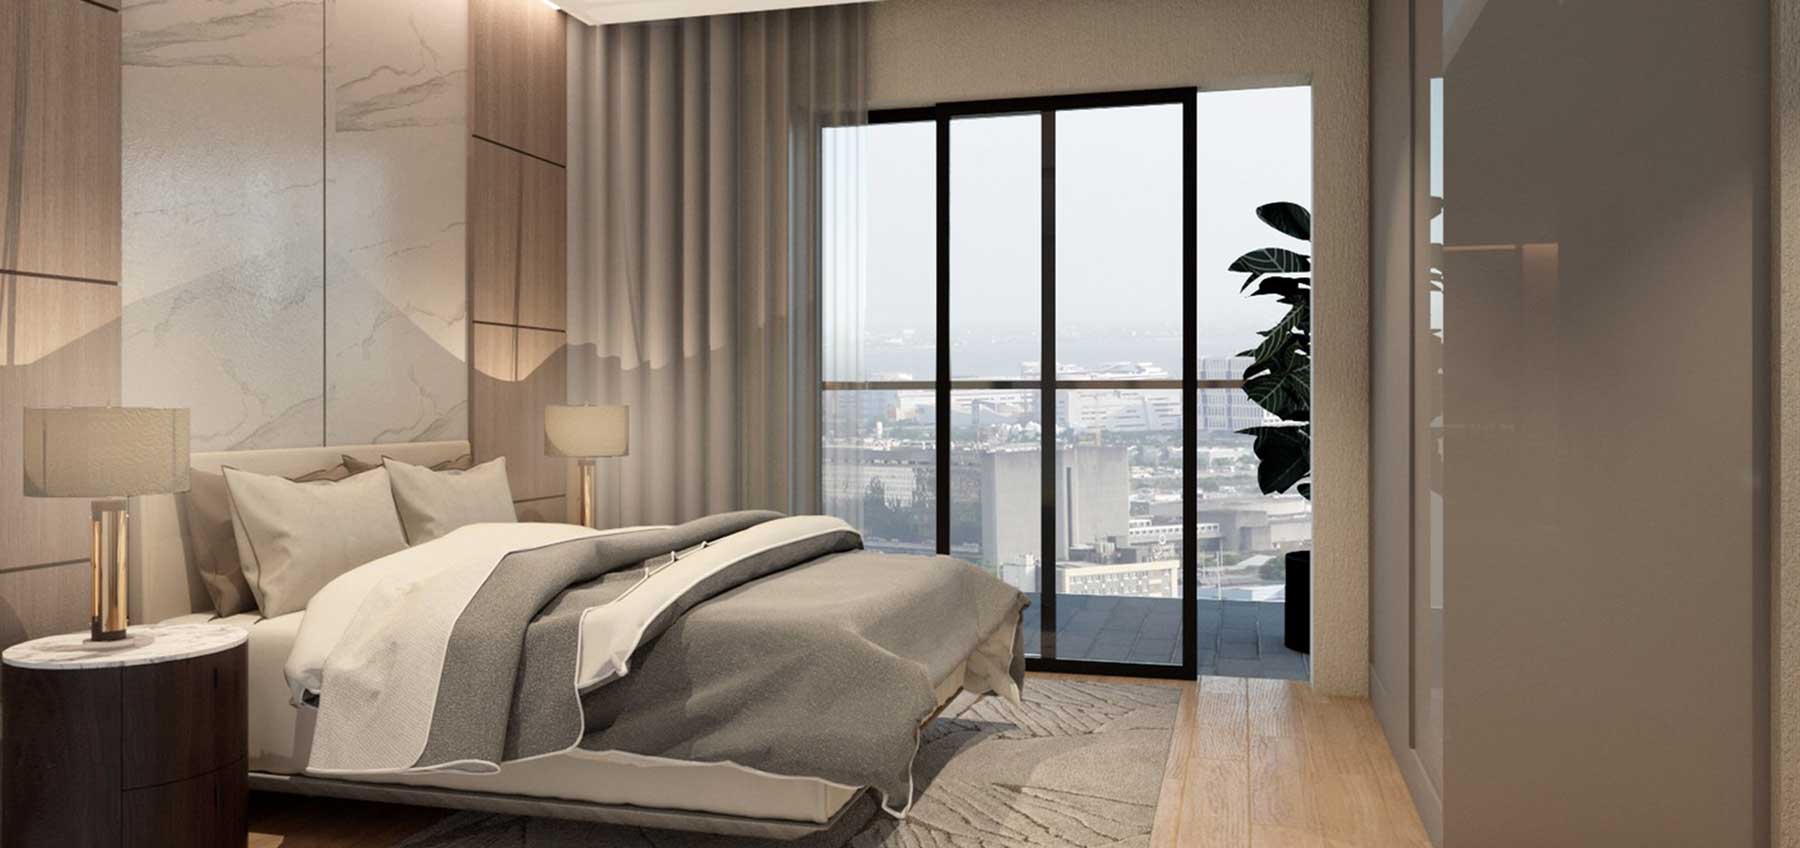 The Garden City bedroom, by WTA Architecture and Golden Bay Land Holdings, conceptualizes the interior design with compact luxury living in the urban city